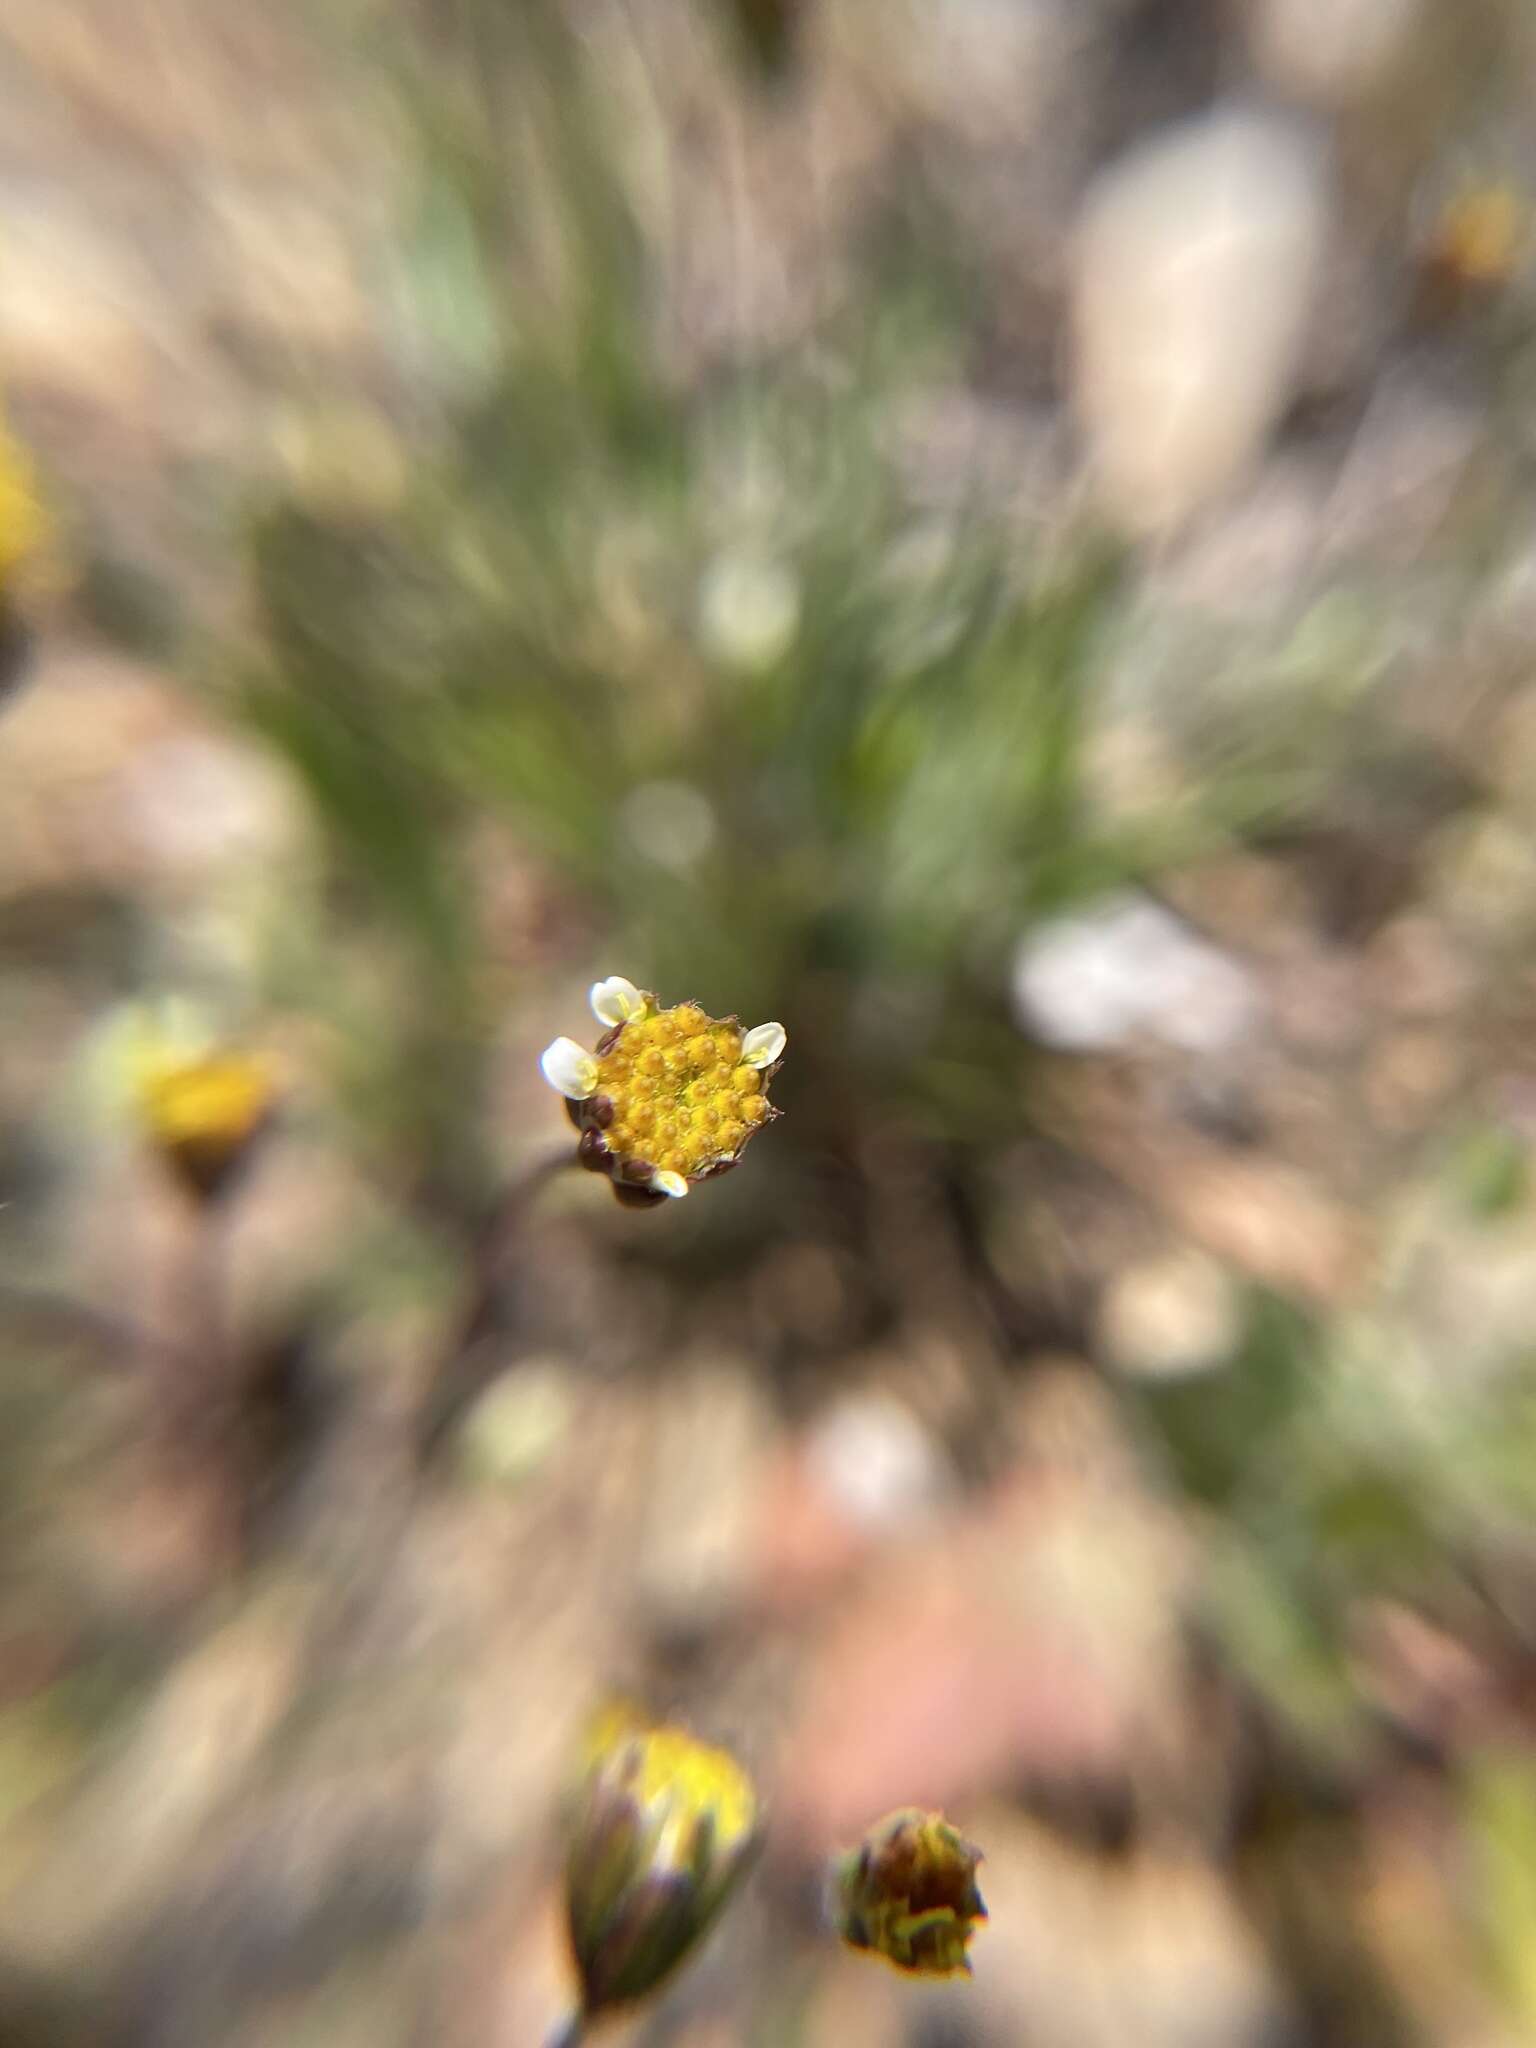 Image of meager pygmydaisy